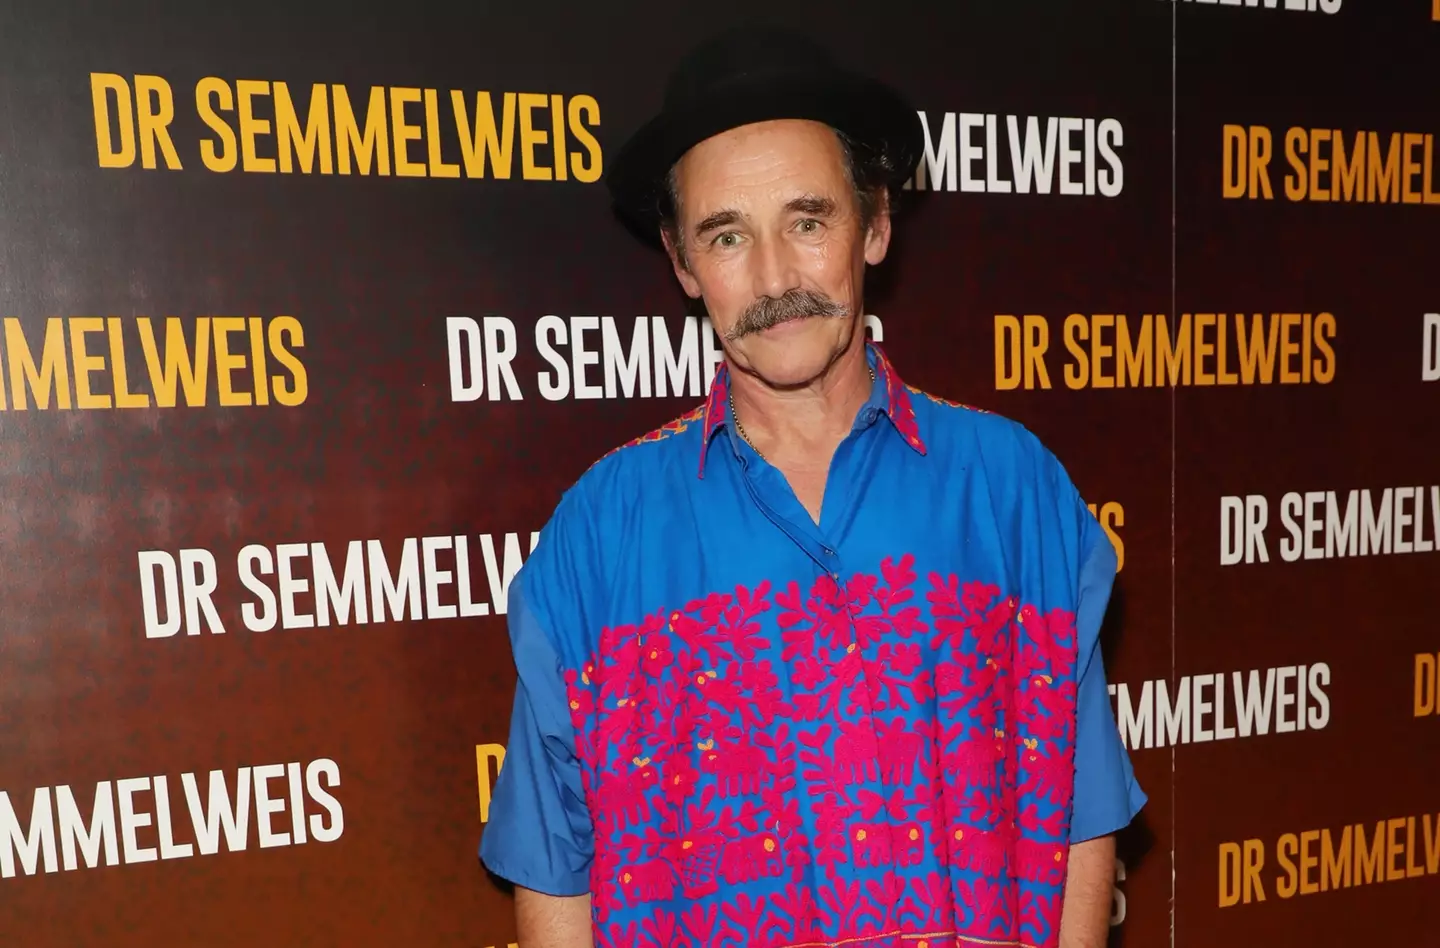 Rylance said he regretted doing the film.